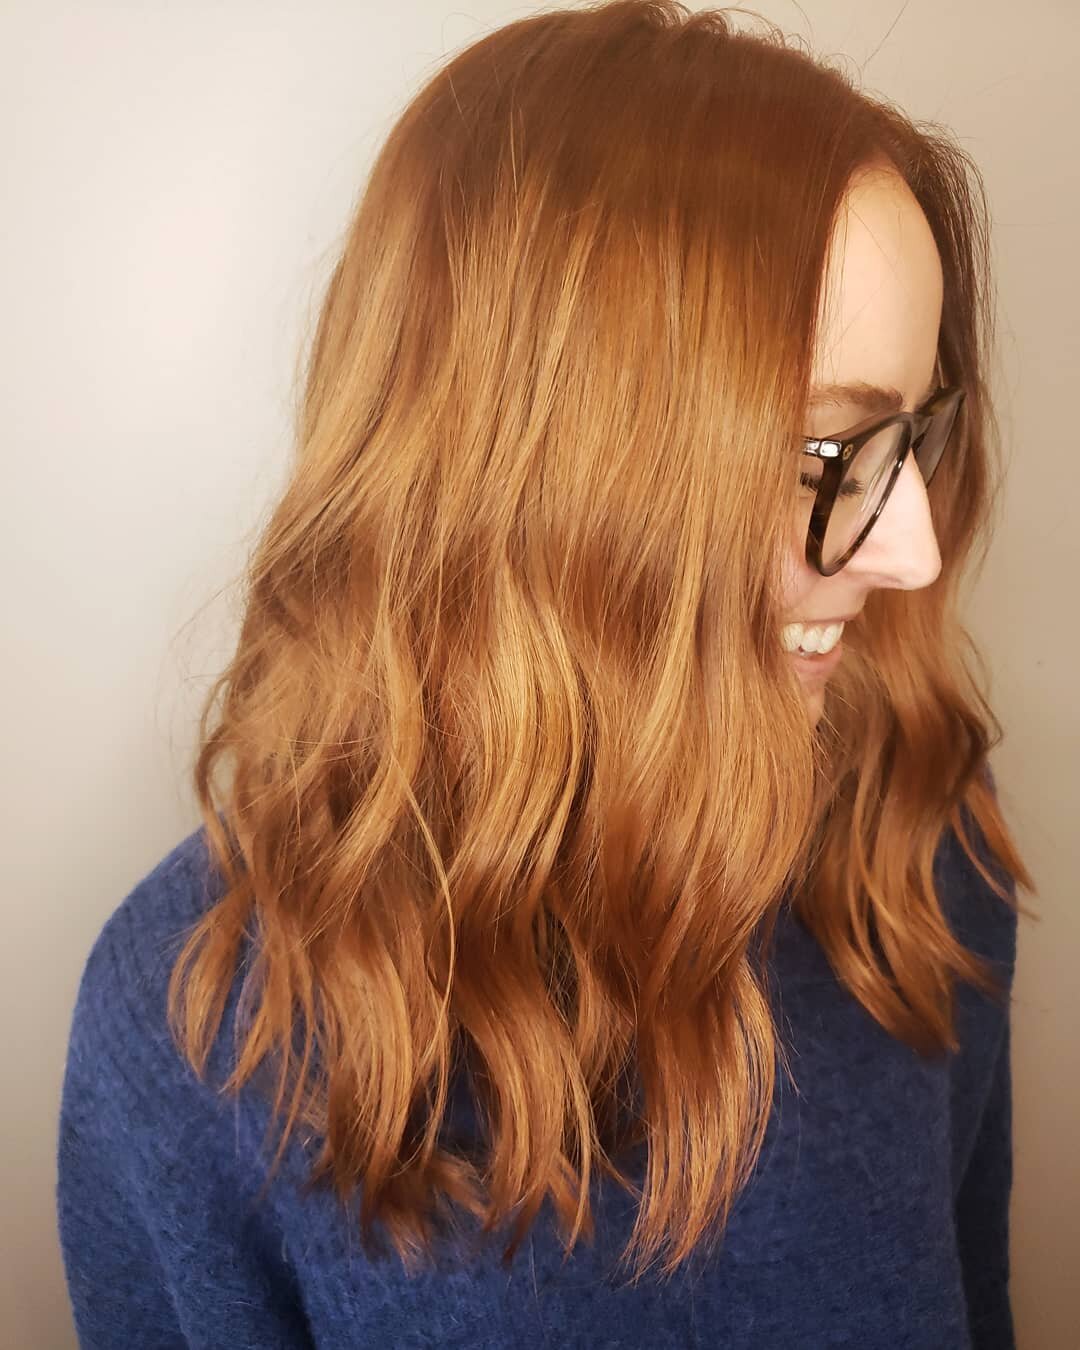 Remember that one time Julia decided to blow everyone's mind by becoming a redhead?! 🥰😍🤪🤯
#copperhair 
#maybeshesbornwithit
#askforwella
#wellahair
#wellared
#makeover
#blondetored 
#justinedidit 
#coteriesalonpdx
#redhead 
#redhair